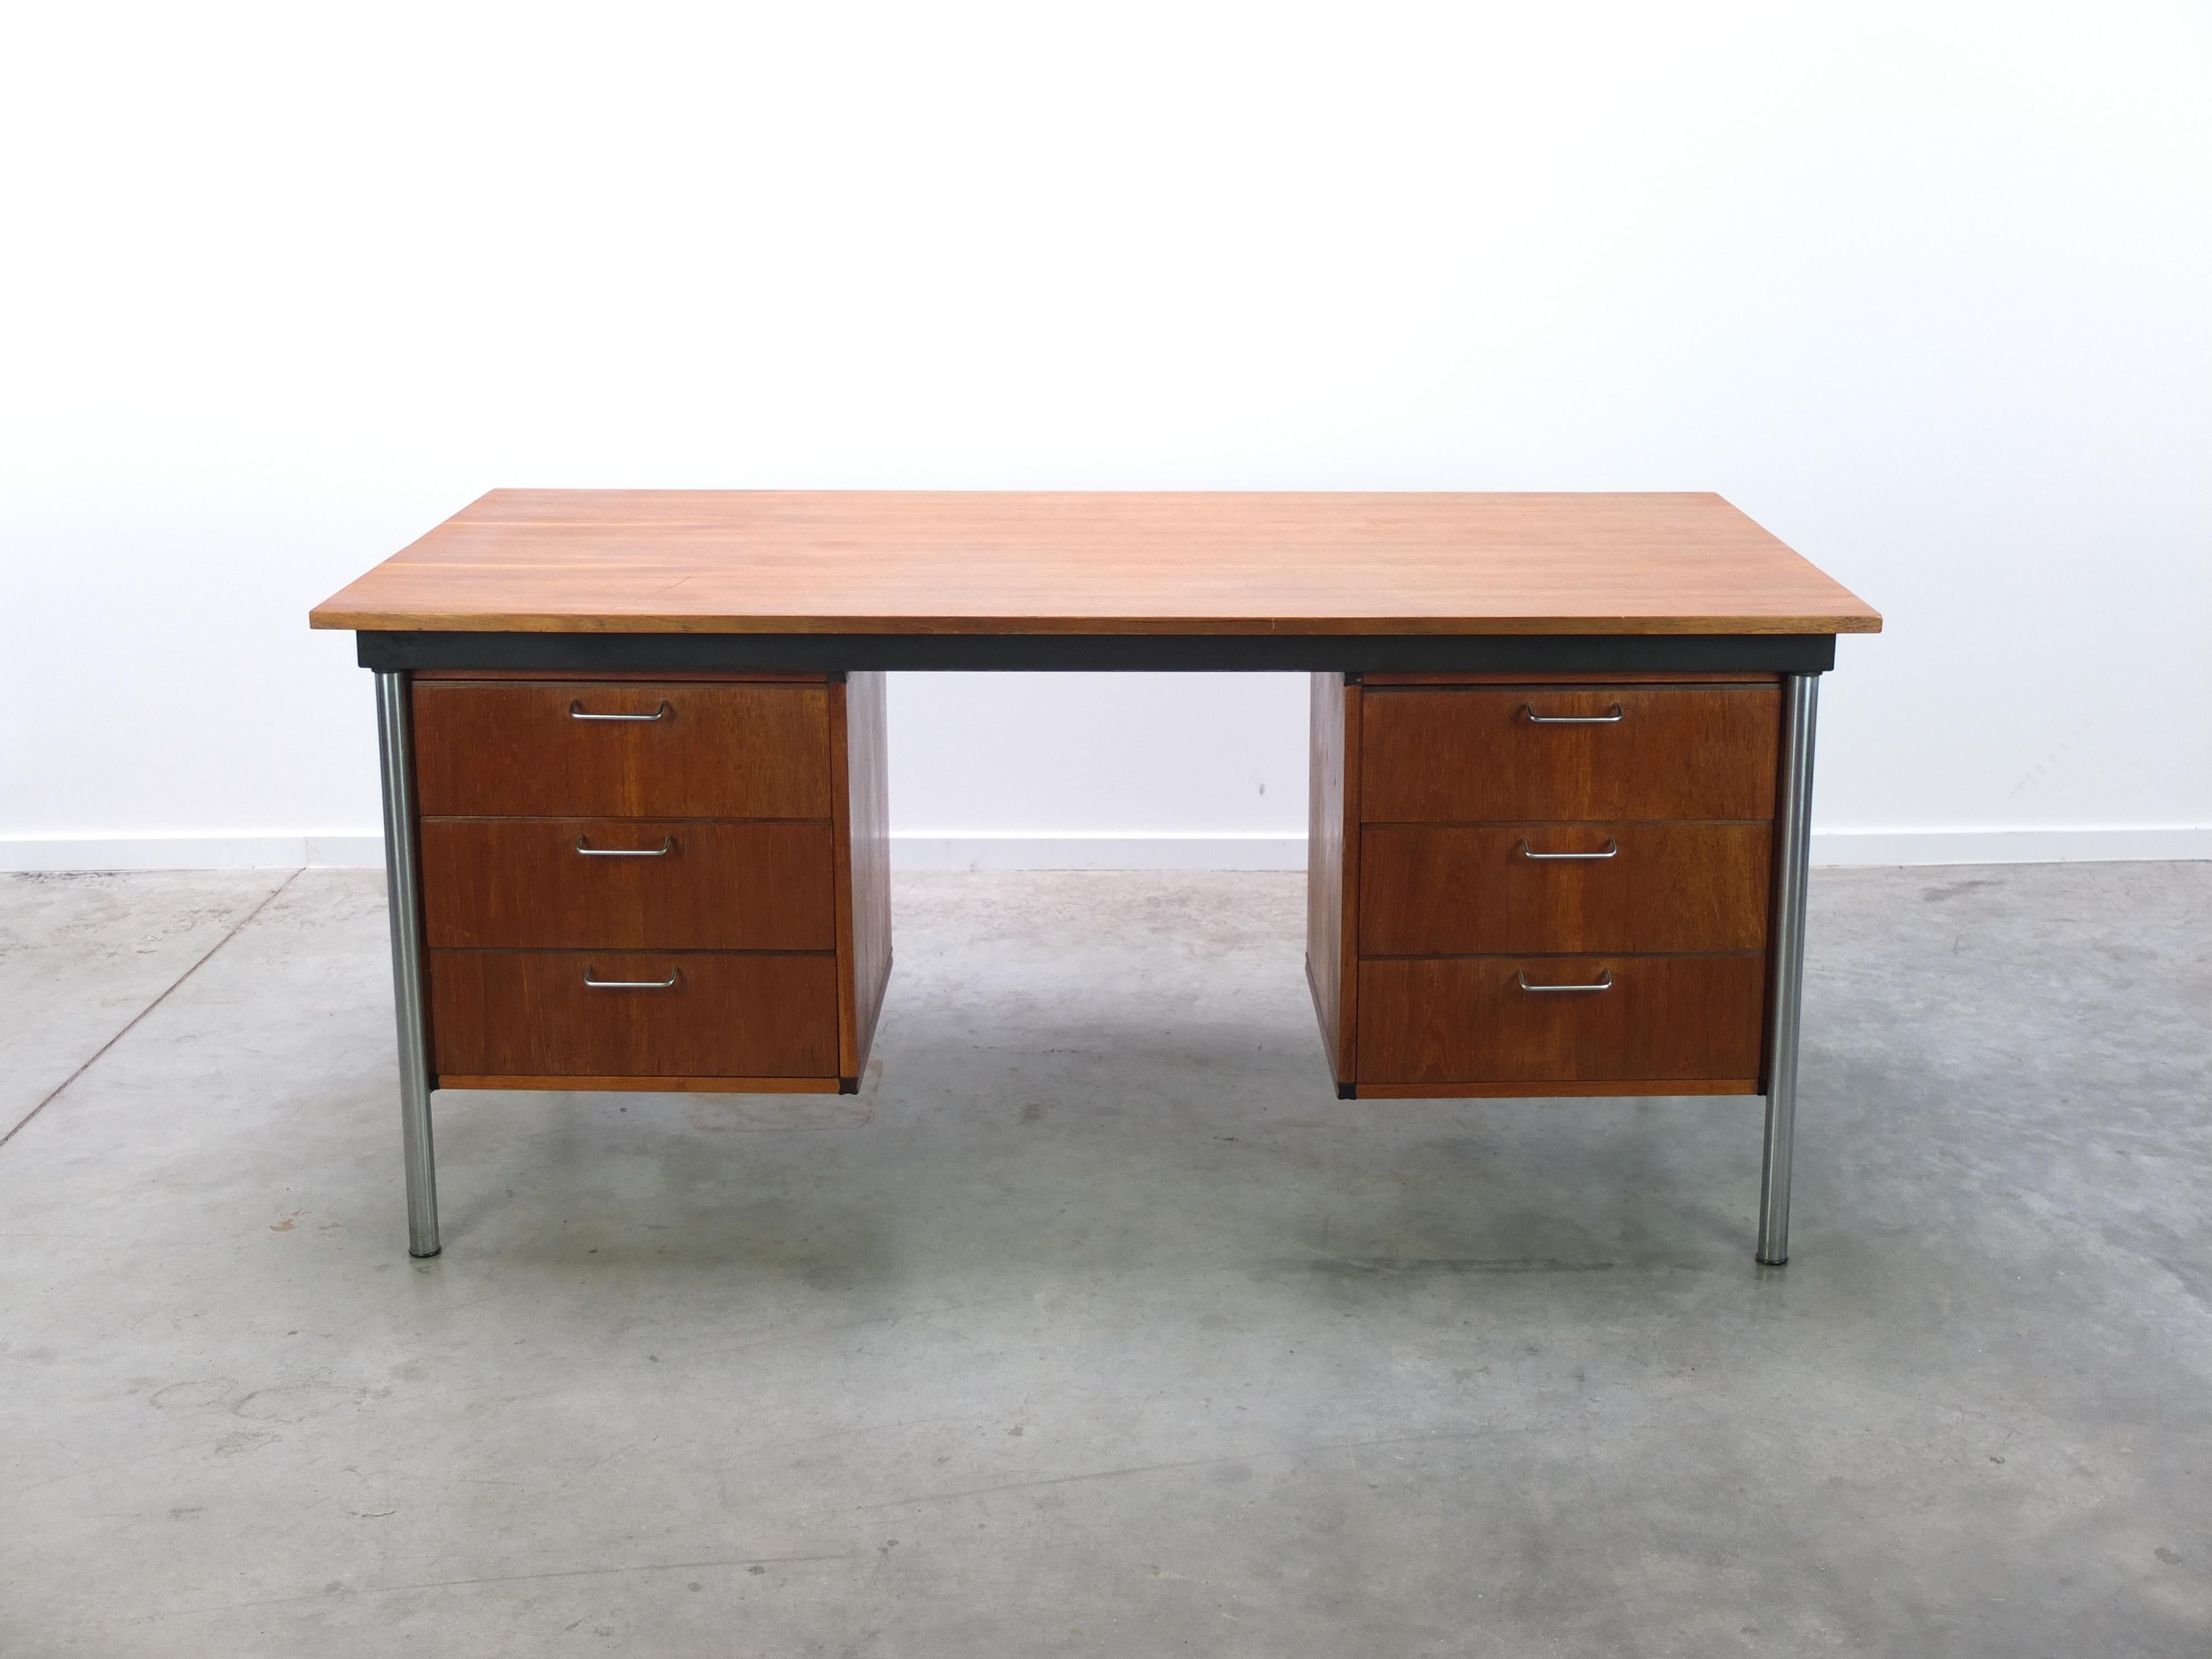 Executive desk designed by Cees Braakman for Pastoe during the 1960s. This model is part of the Made to Measure series recognized by the use of teak wood combined with rosewood joints in the corners. Nice modernist touch thanks to the brushed steel